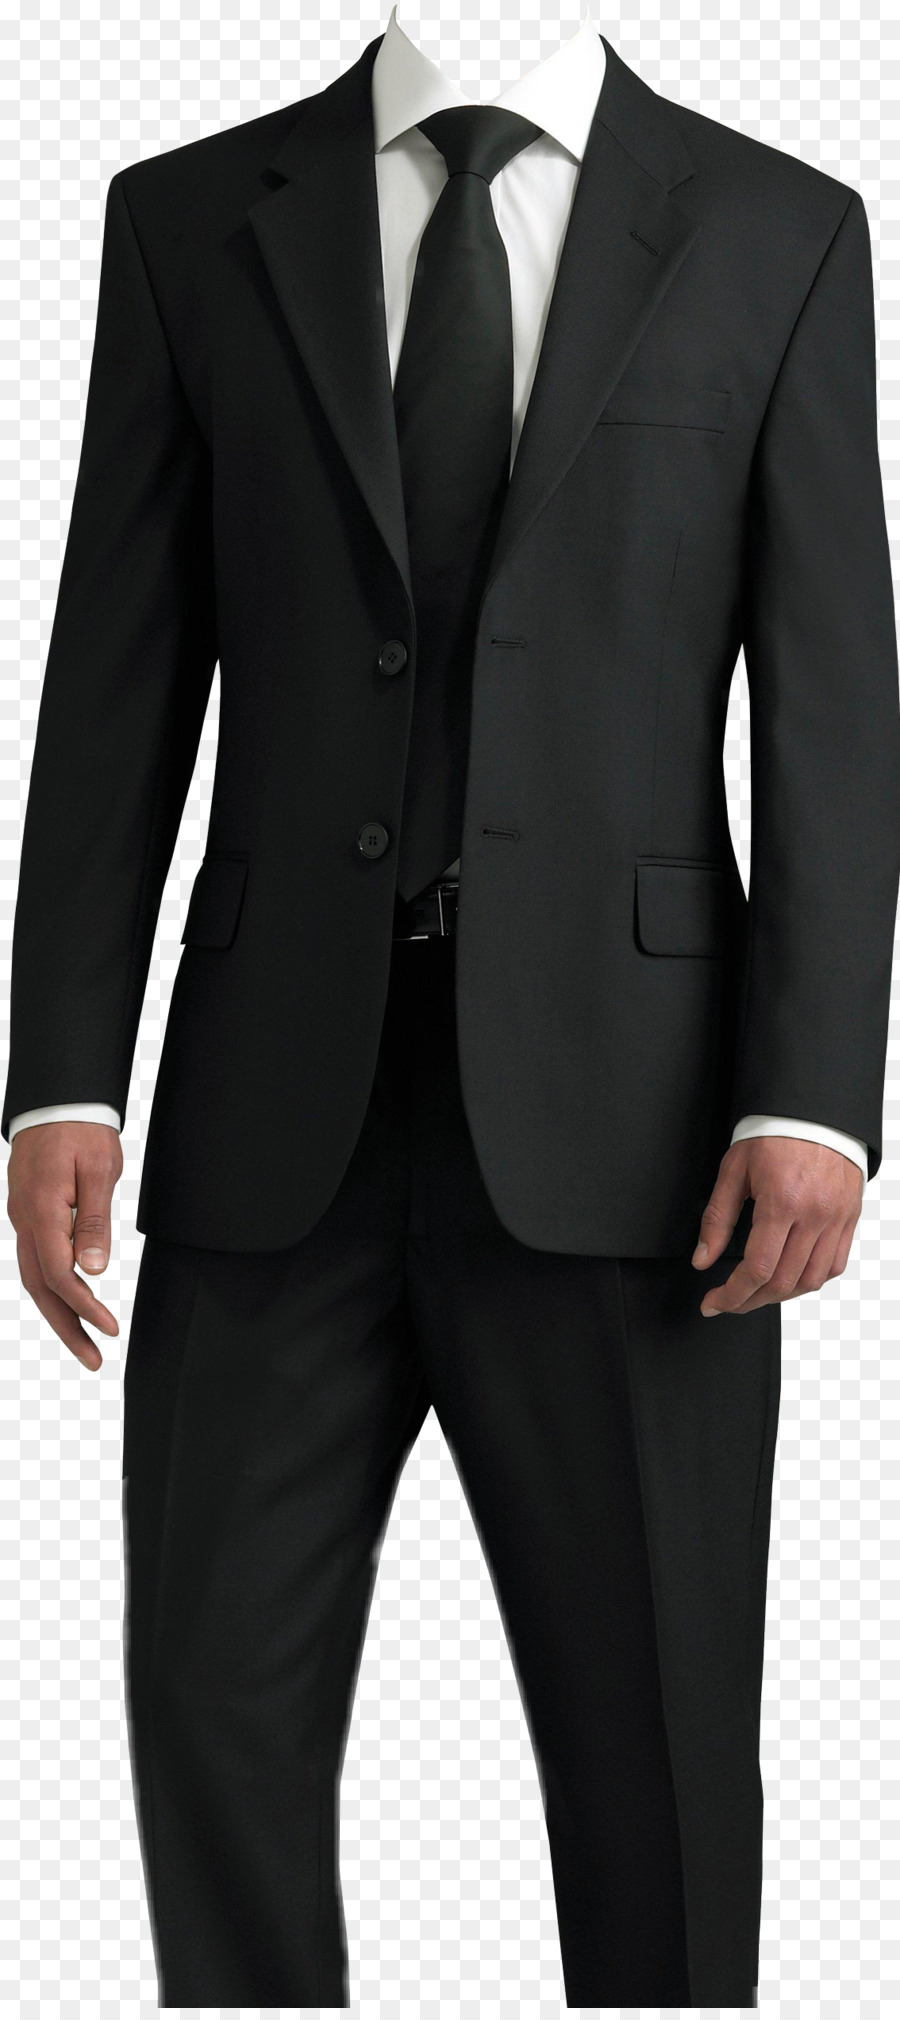 Suit Portable Network Graphics Adobe Photoshop Formal wear Transparency - costume png images png download - 1134*2530 - Free Transparent Suit png Download.